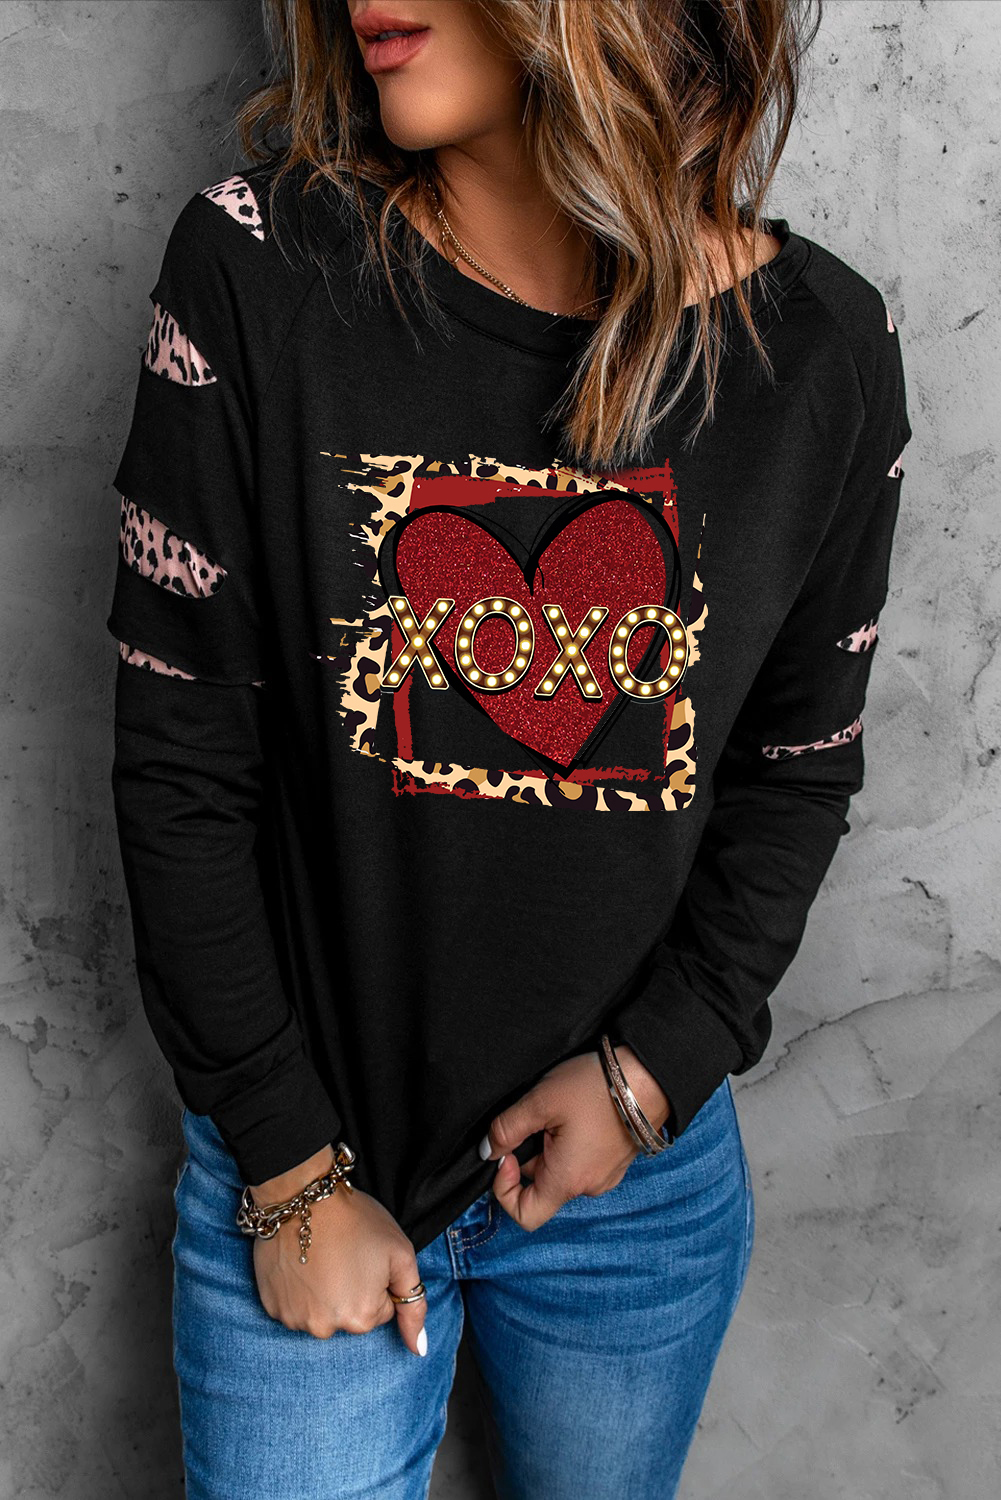 New arrivals 2023 Black XOXO Heart Shaped Cut Out Graphic Sweatshirt for VALENTINEs Day